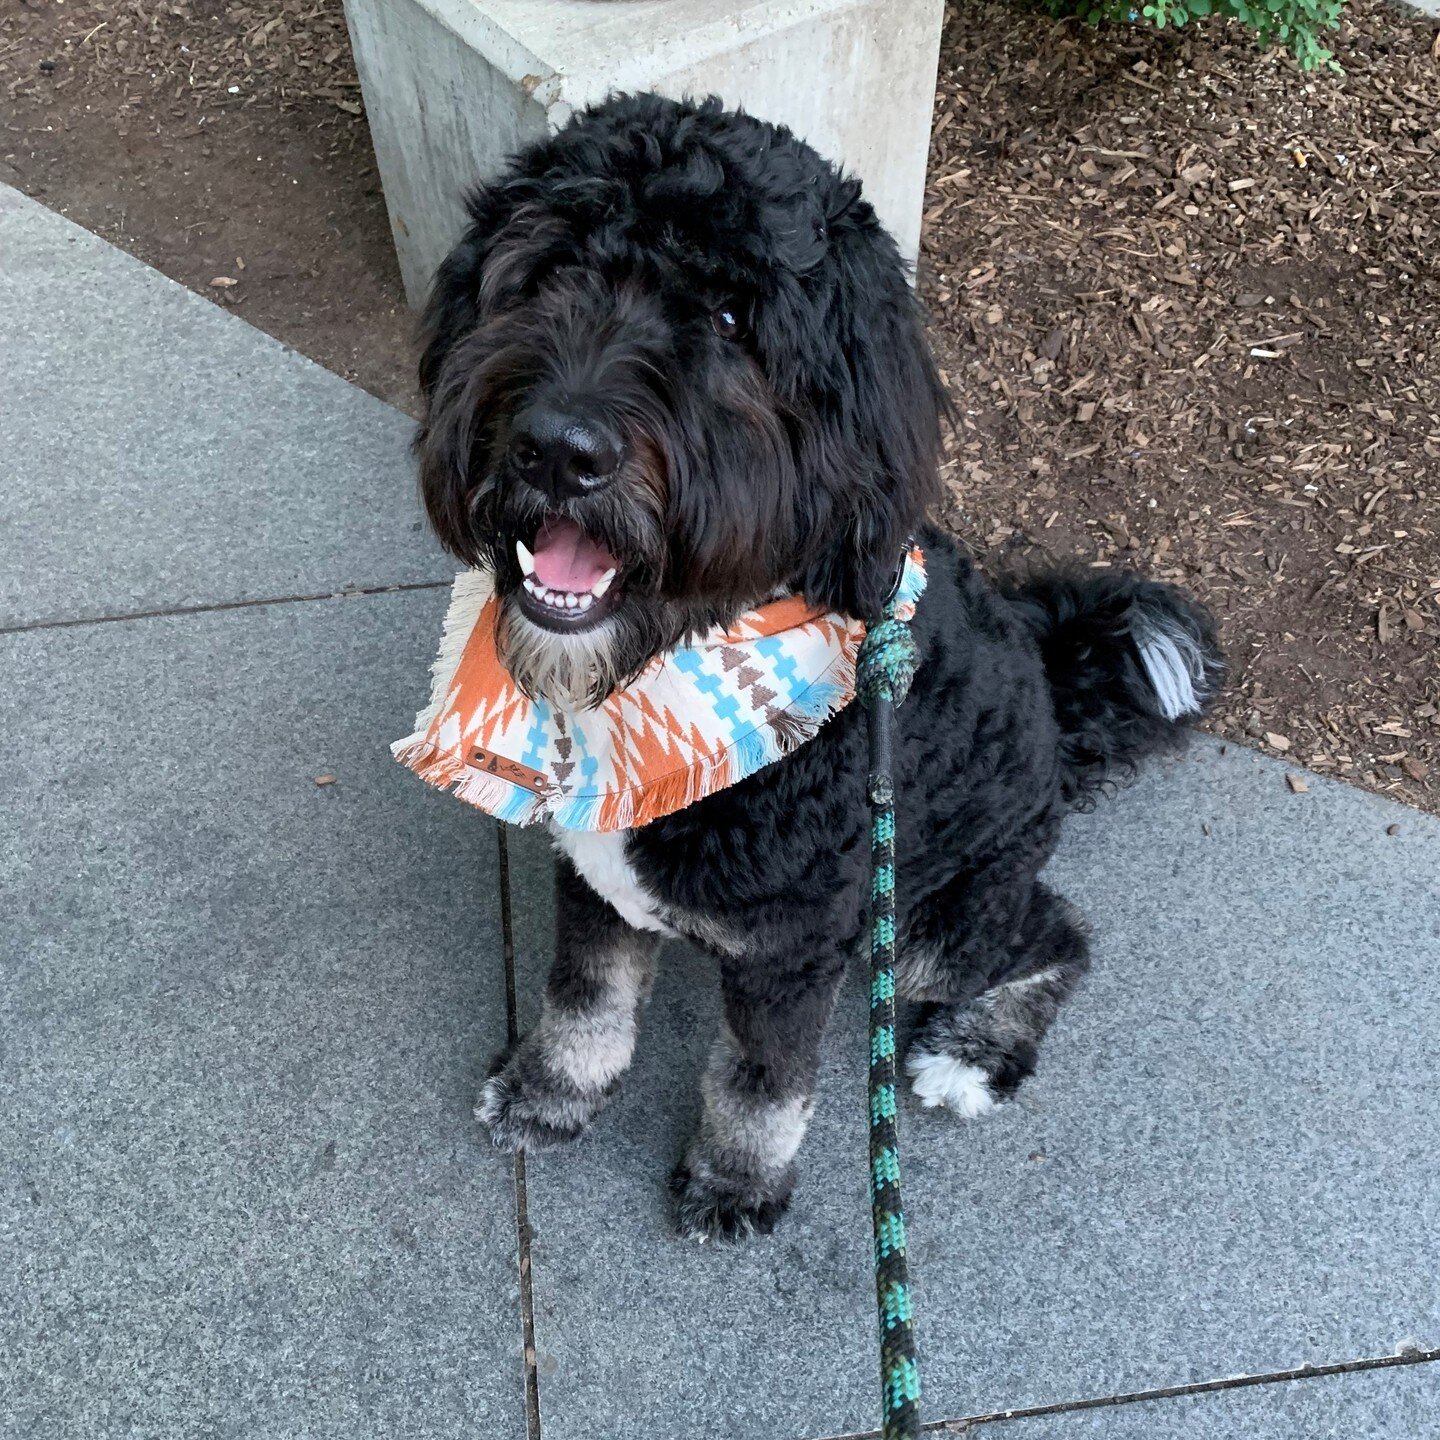 #PetsofNUEM meet PGY1 John Sullivan's dog, Rayna Jane! Rayna Jane, or Ray J, is an 11-month-old bernedoodle who loves living in Streeterville! She loves hiking, going to the dog park, and eating ice cream. #whynuem